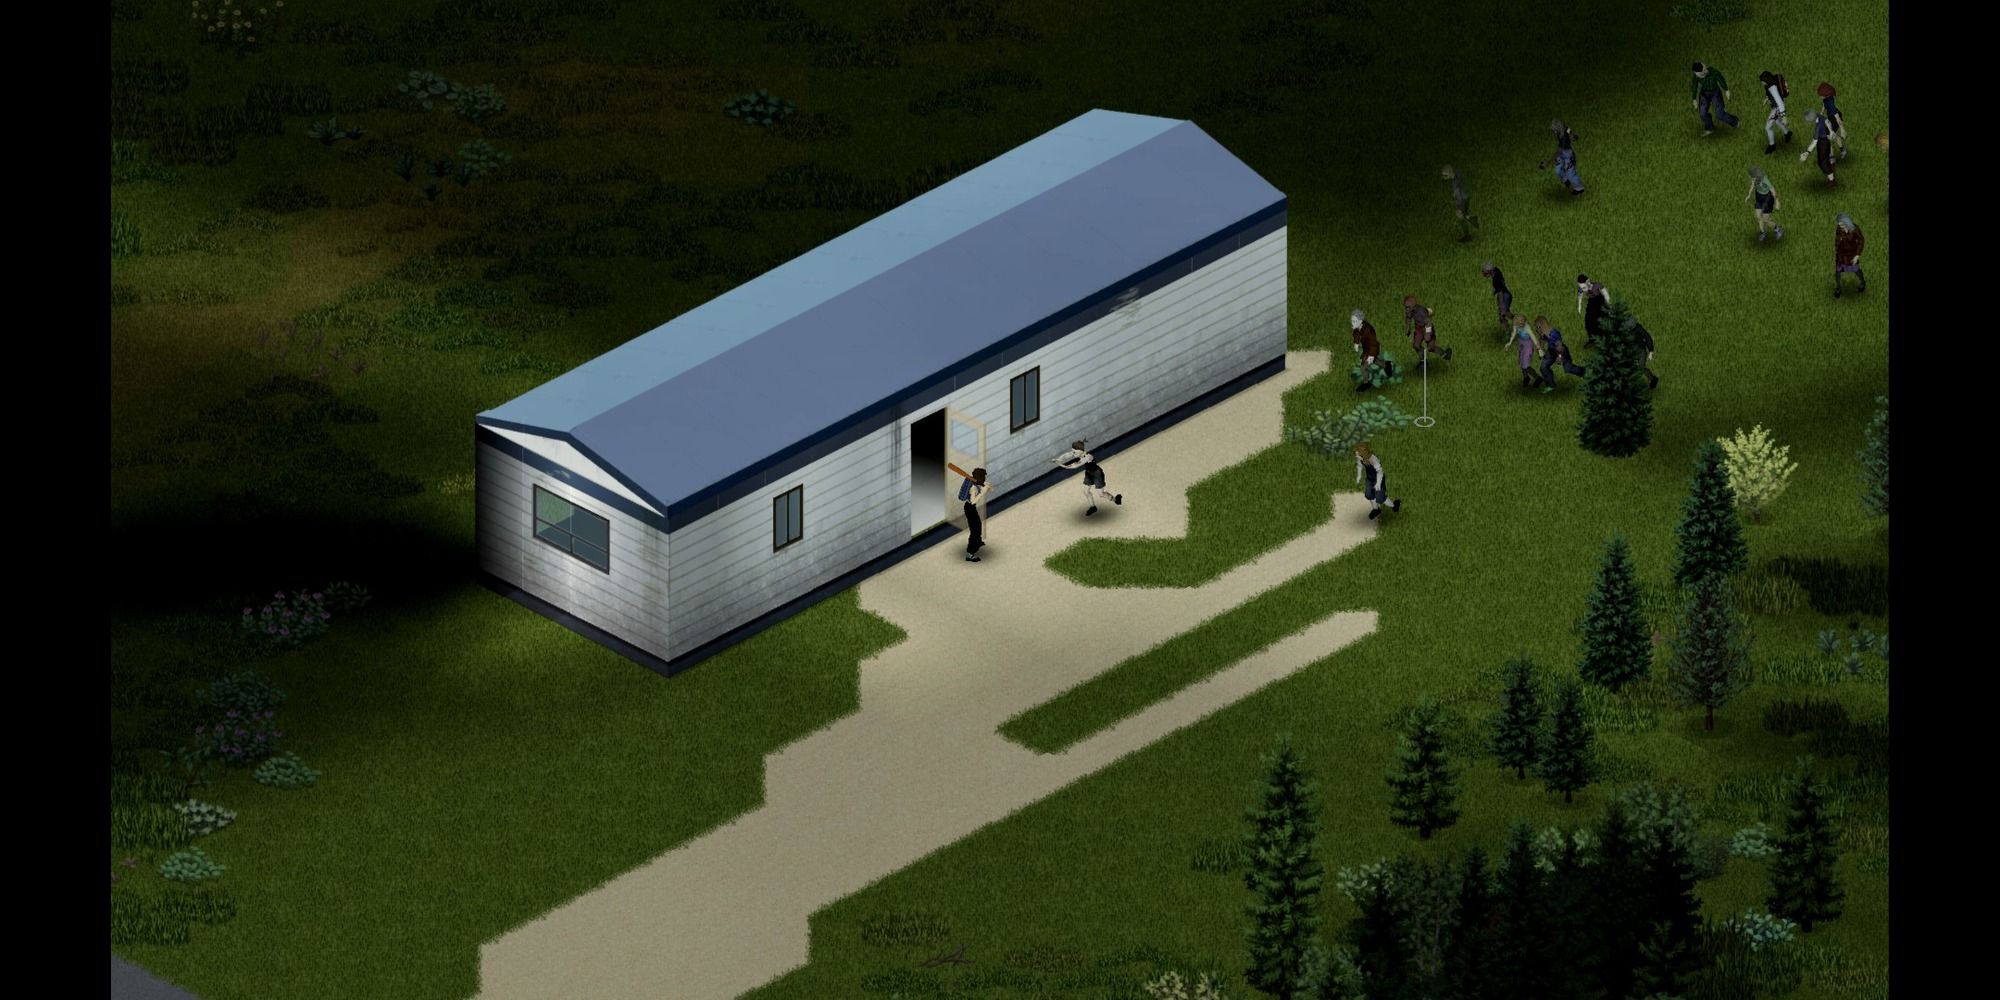 Project Zomboid player fights zombies